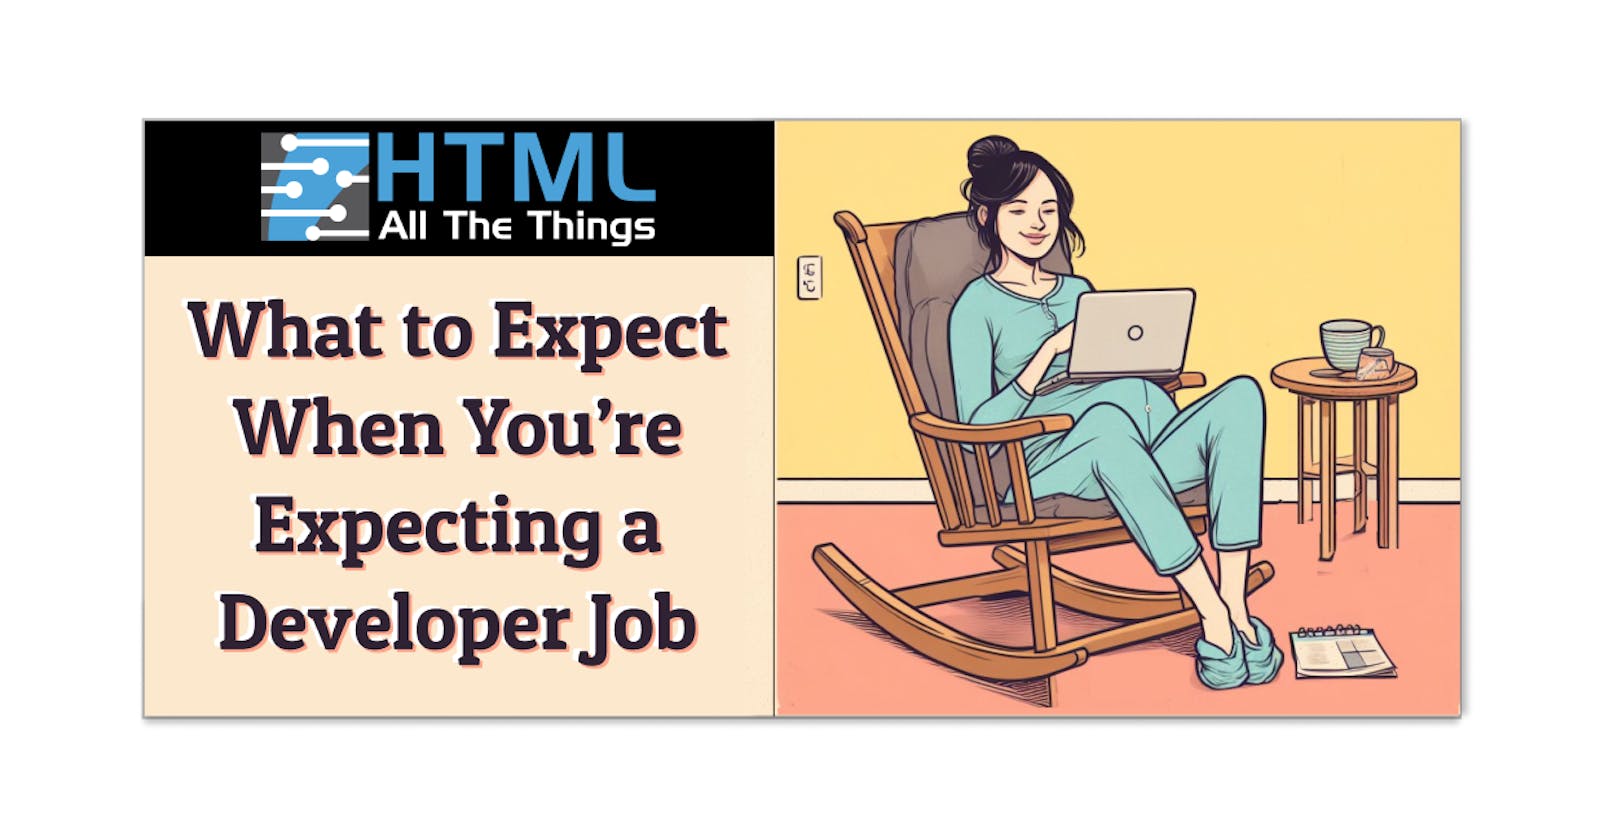 What to Expect When You’re Expecting a Developer Job